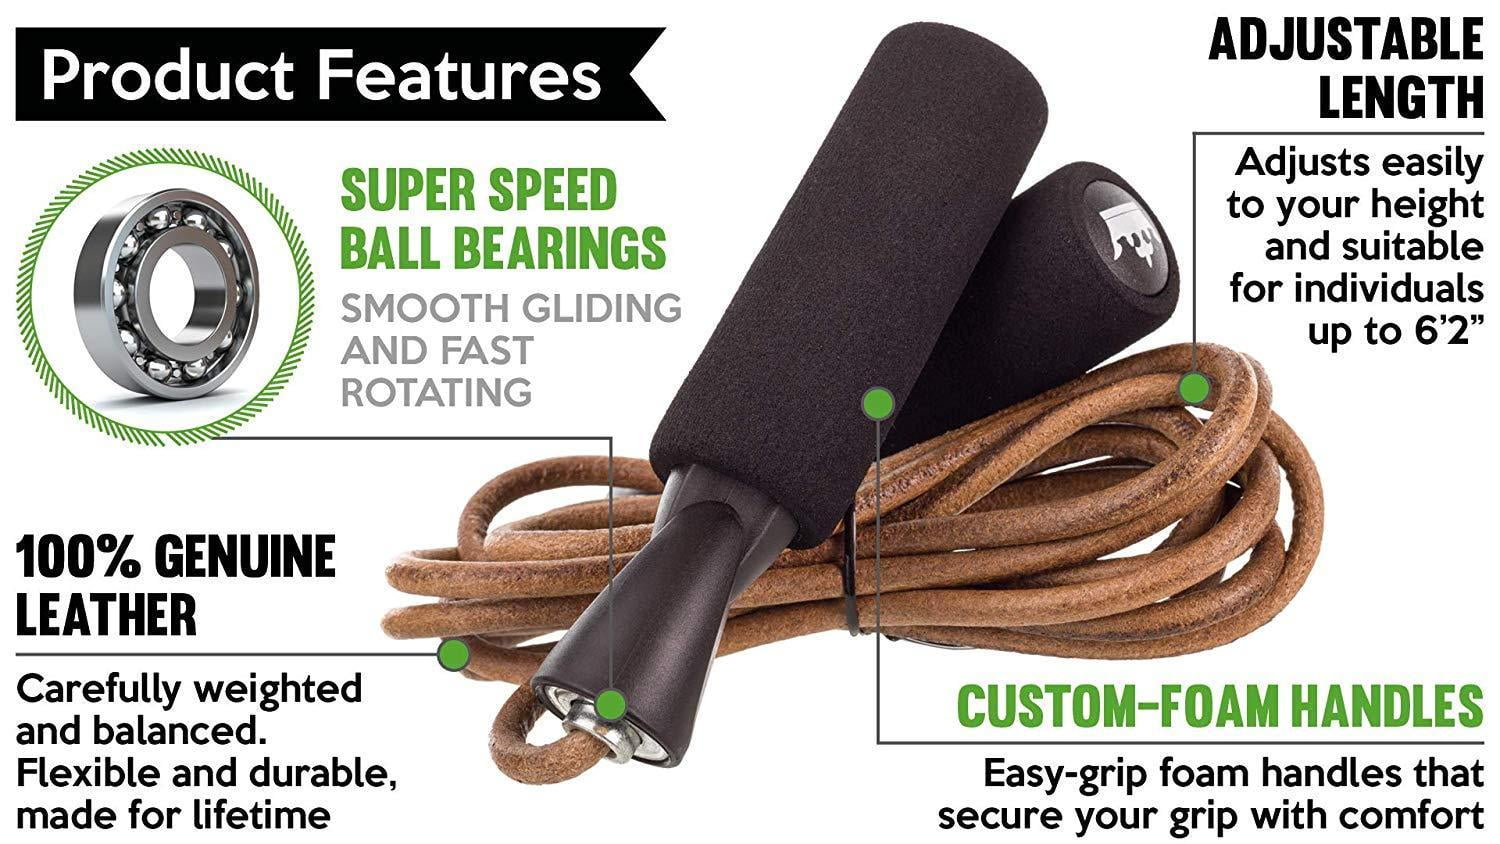 Jump Rope :: Leather Skipping Ropes for Workout and Speed Skip Training ::  Because You Need the Best Jumping Rope for Cardio Fitness Exercise :: Your  New Skip Rope Includes Workout Vide -